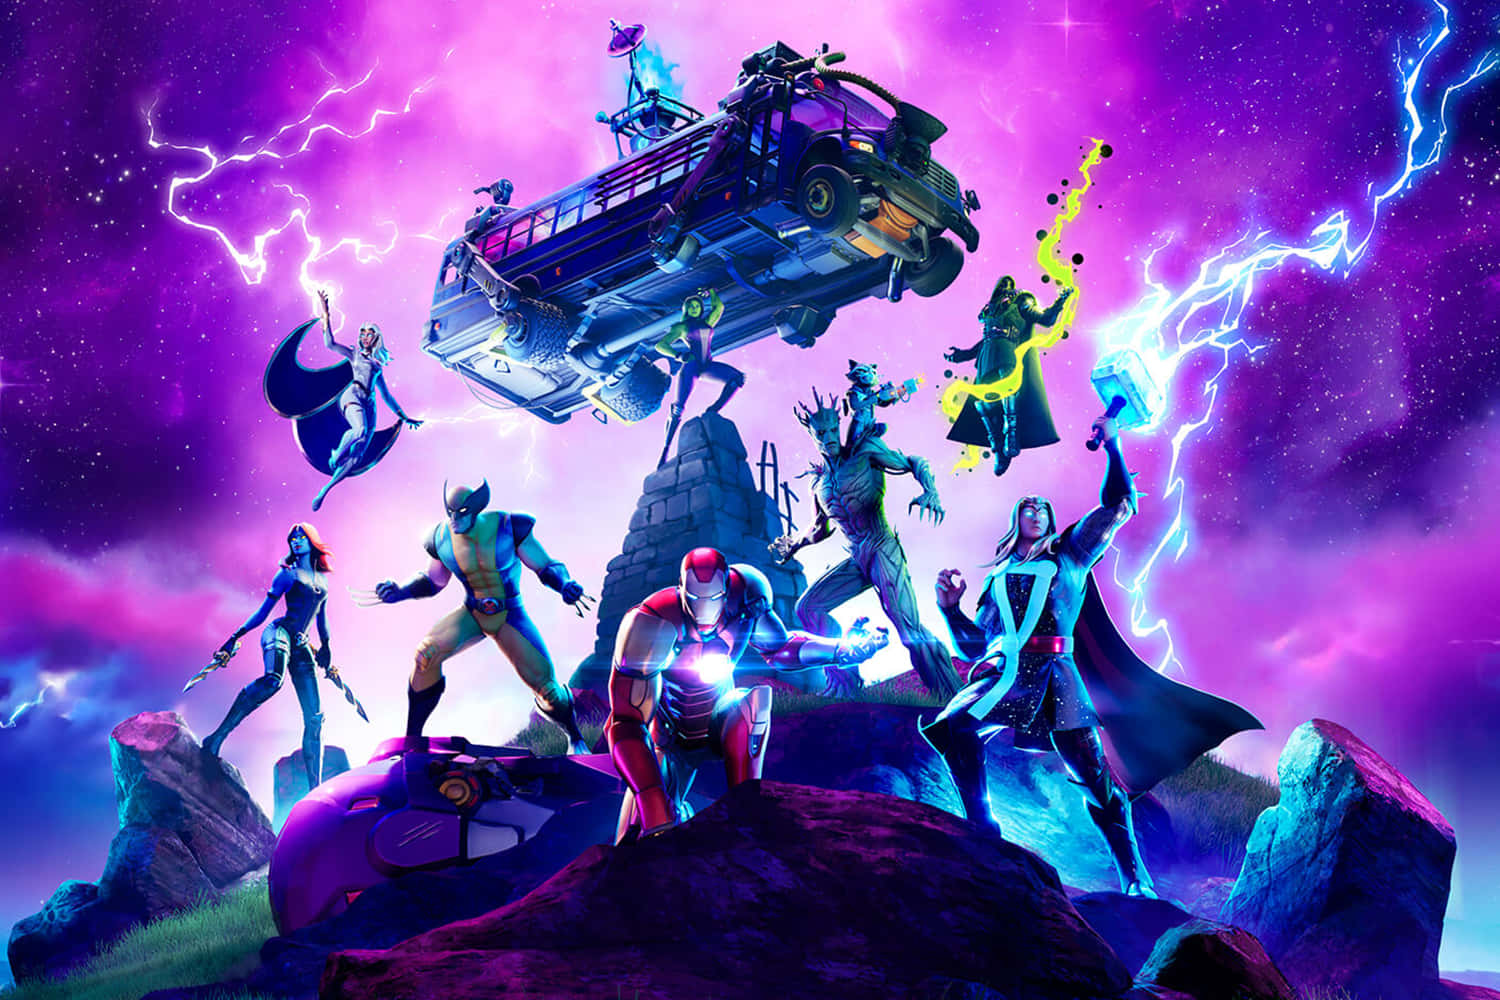 Explore the incredible action-packed world of Fortnite and join in on the cool!